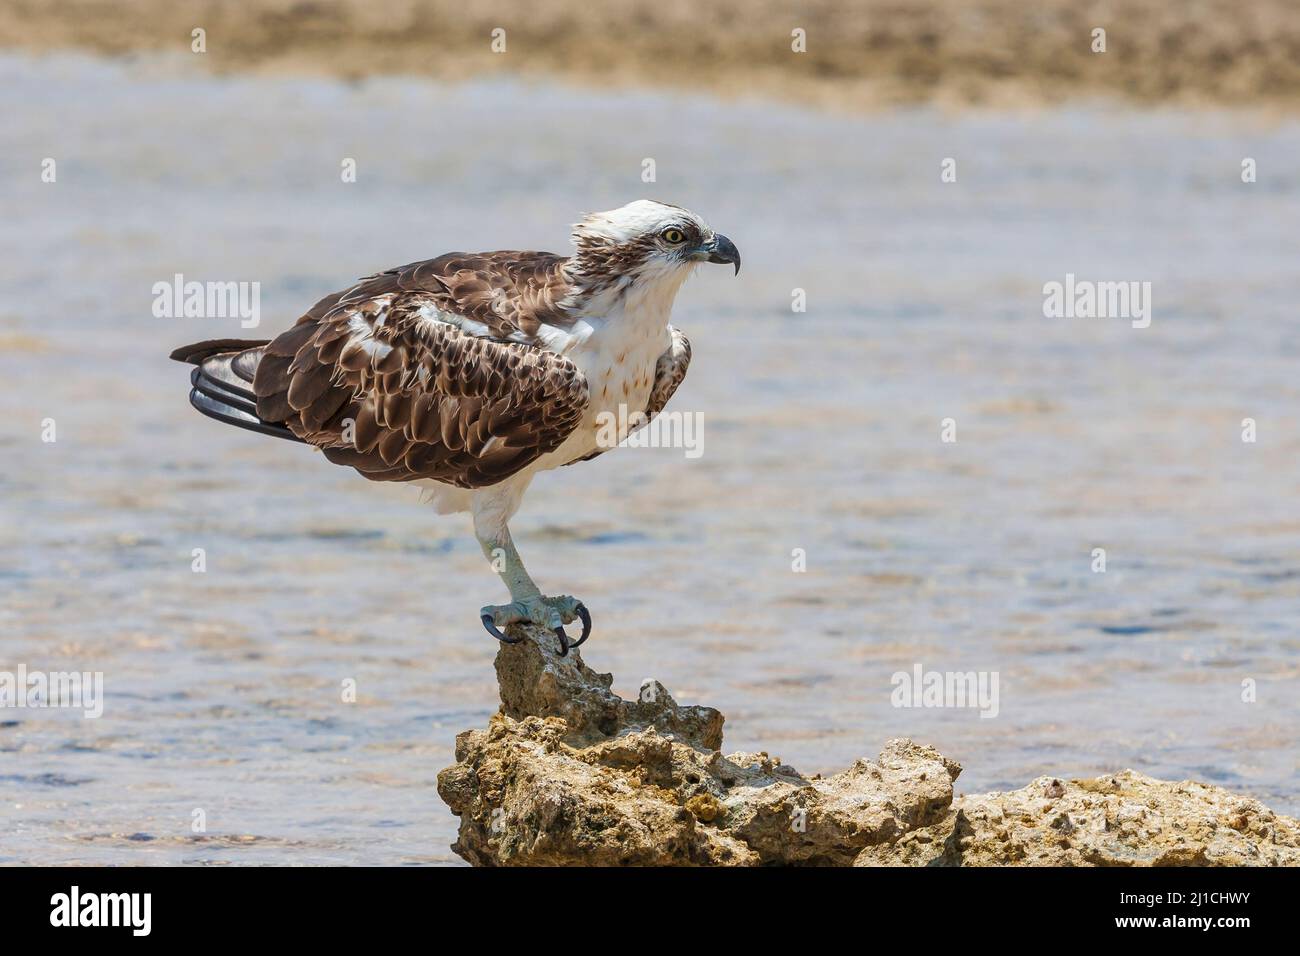 Pandion haliaetus - White-tailed Eagle - close-up portrait. The eagle stands on a stone in the sea on one leg and has the other leg hidden. Wild photo Stock Photo